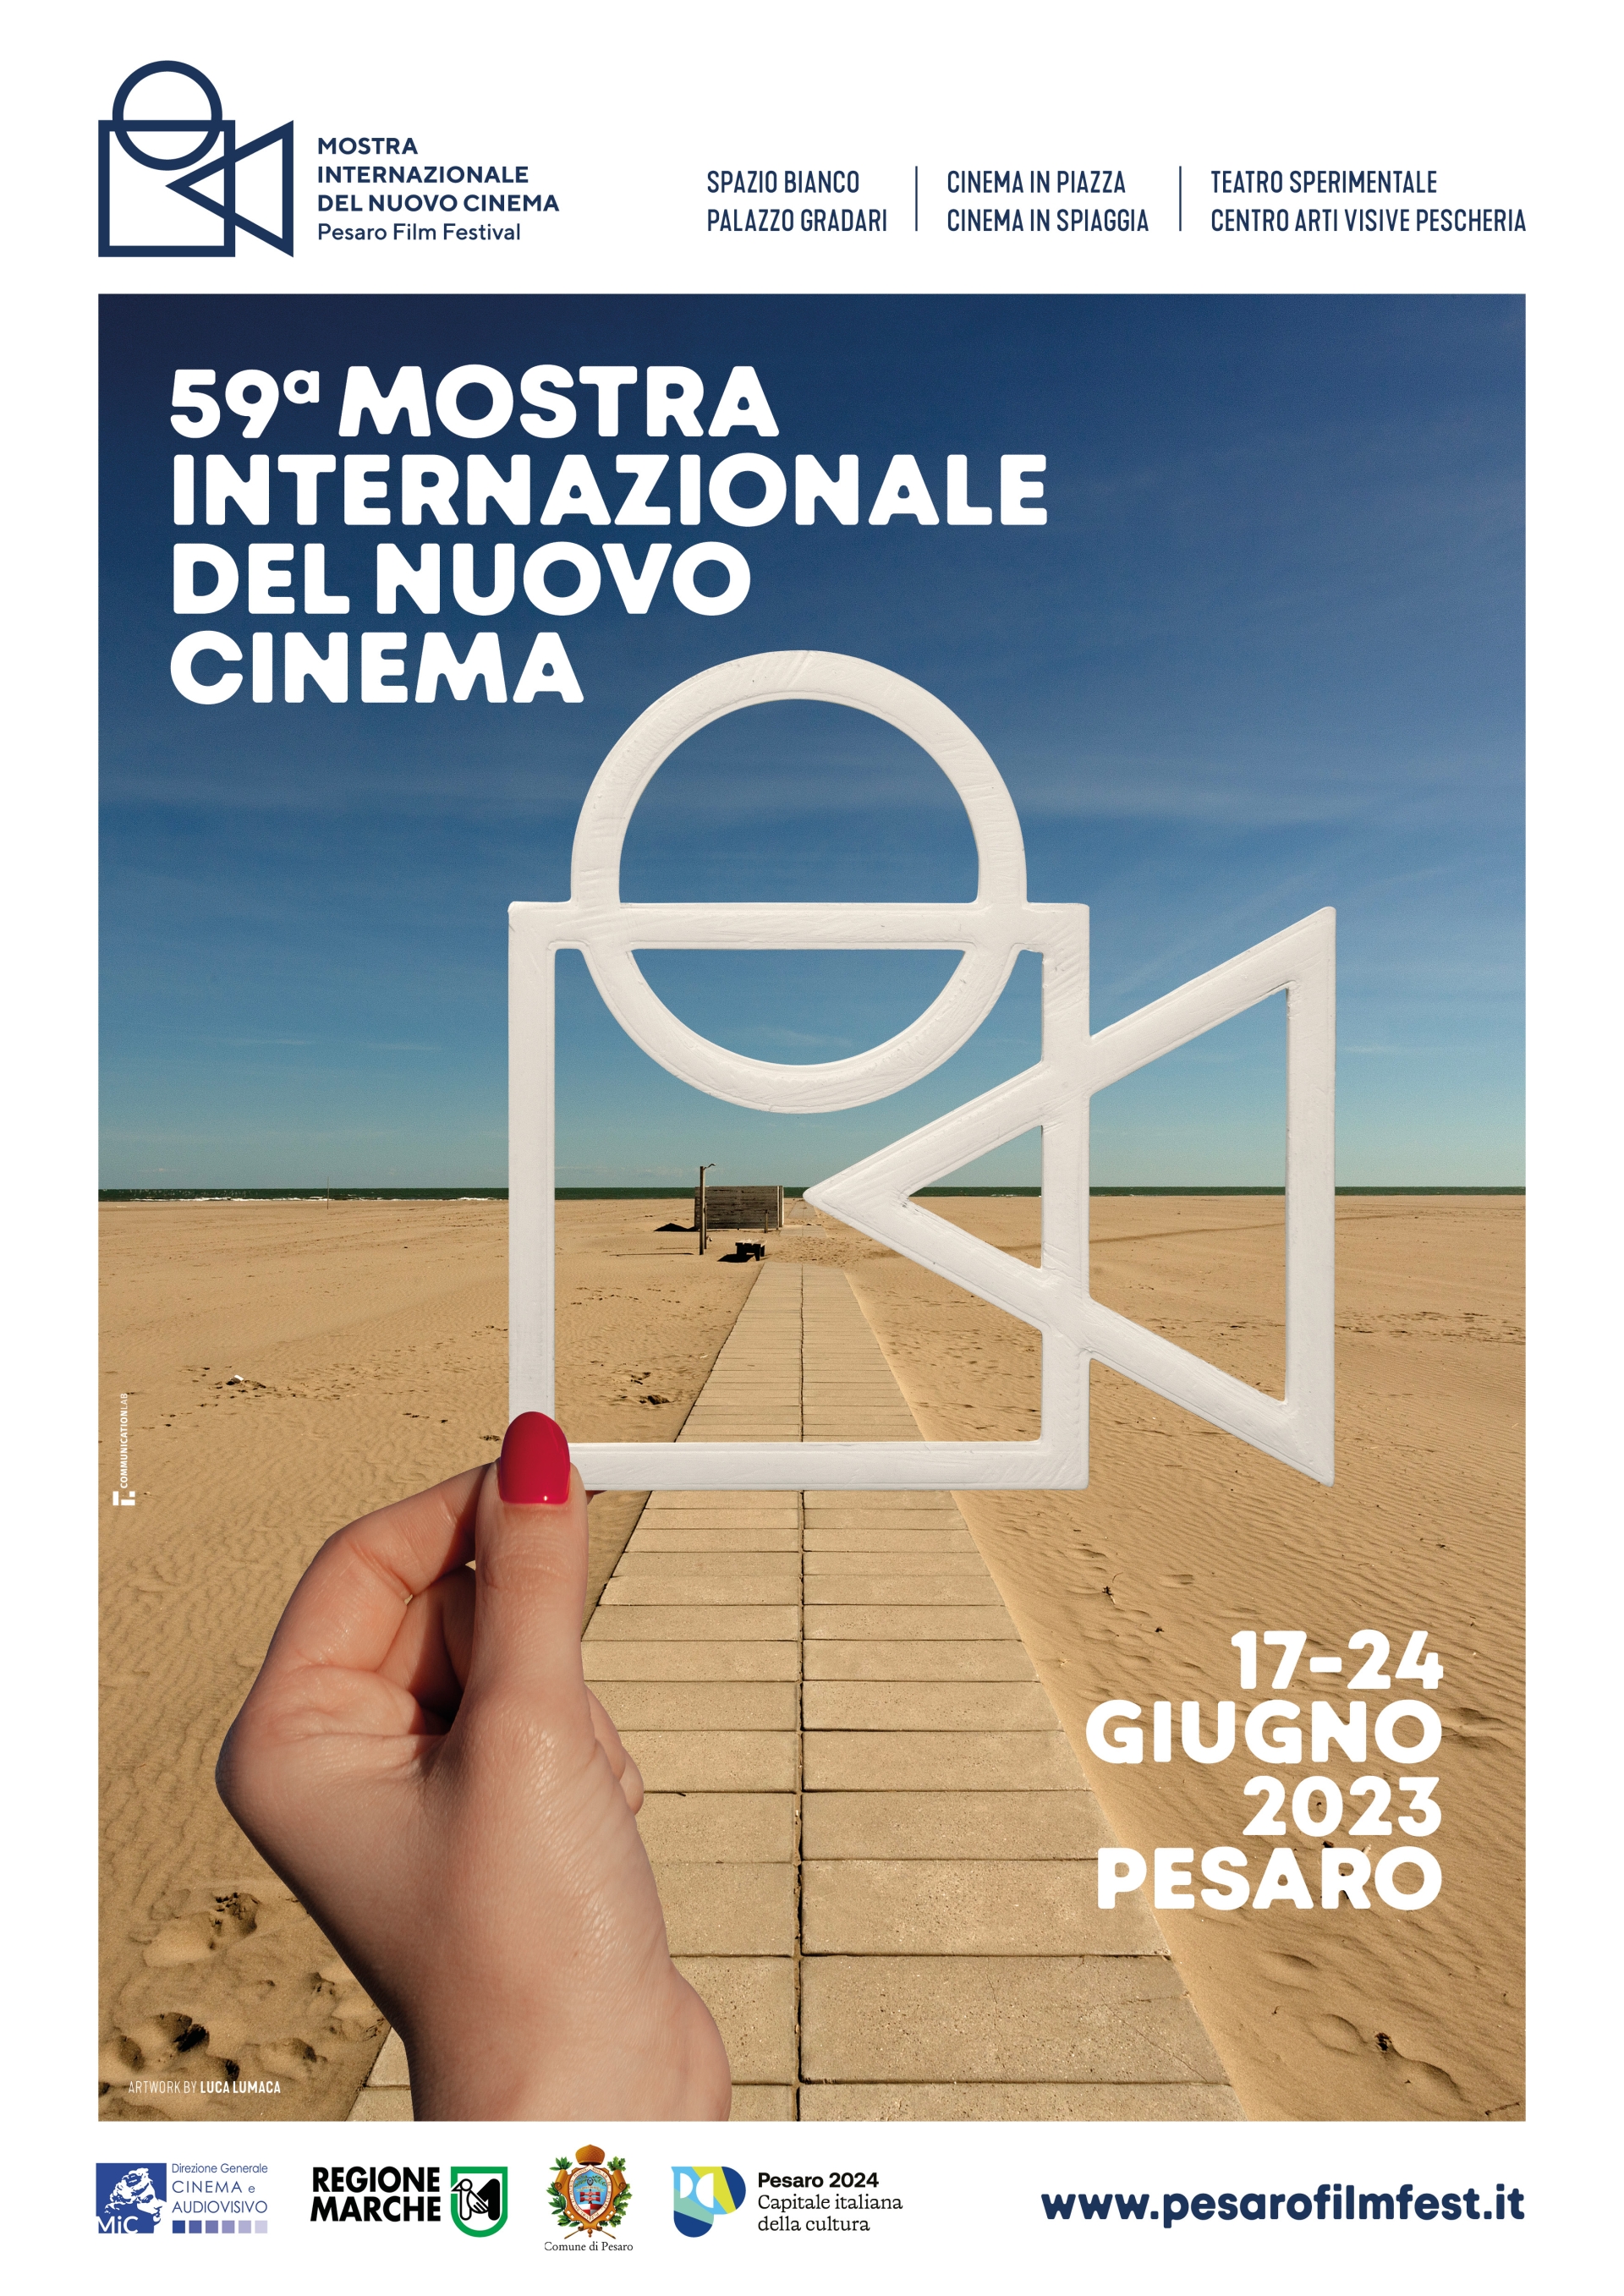 Luca Lumaca signs the poster and the theme song for the 59th edition of the Pesaro Film Festival